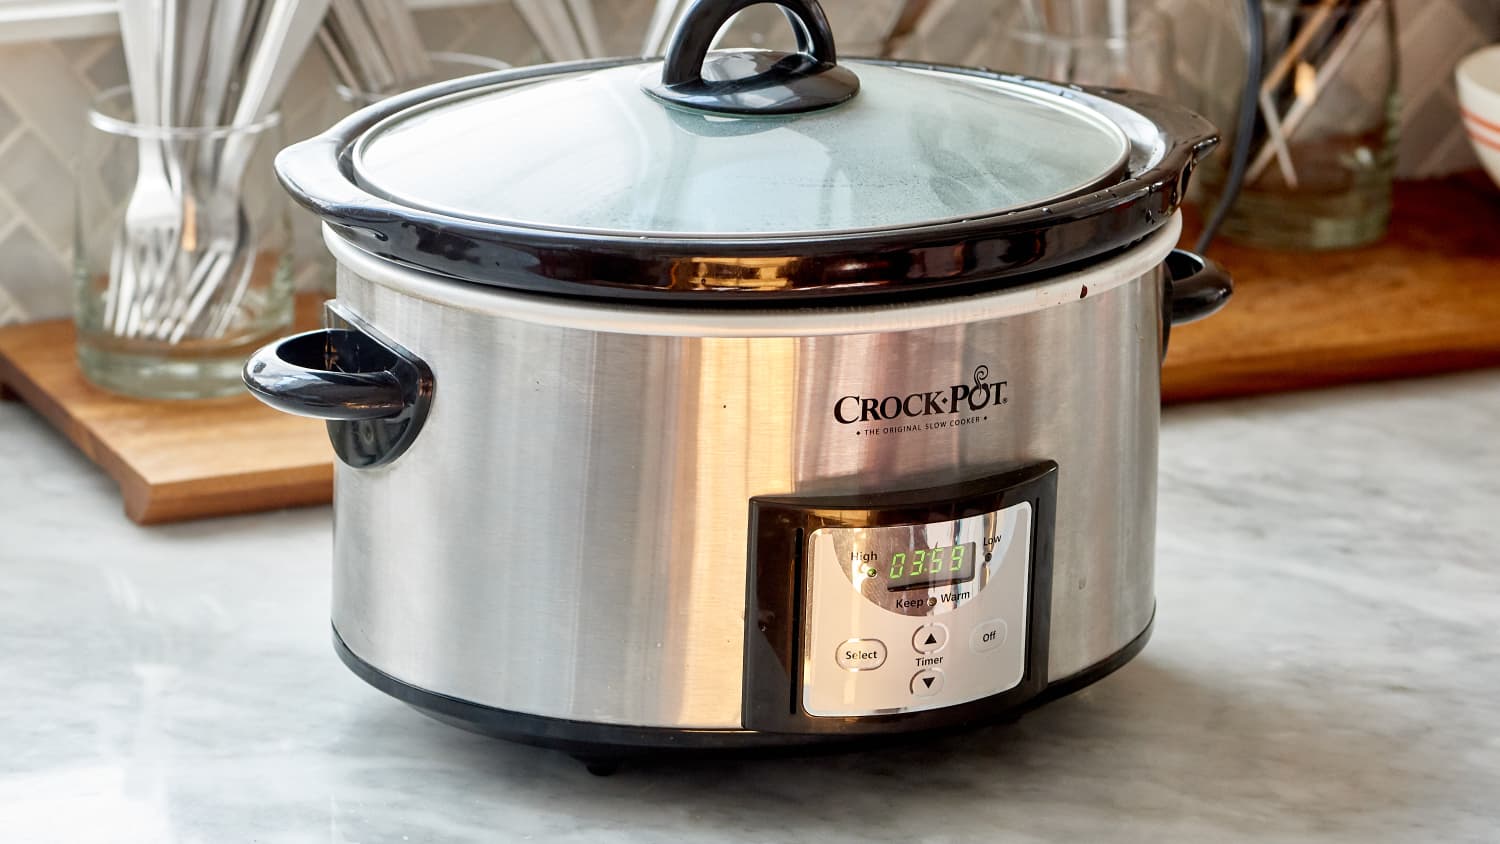 Just Ask Alexa: The Crockpot® Brand Continues to Make Slow Cooking